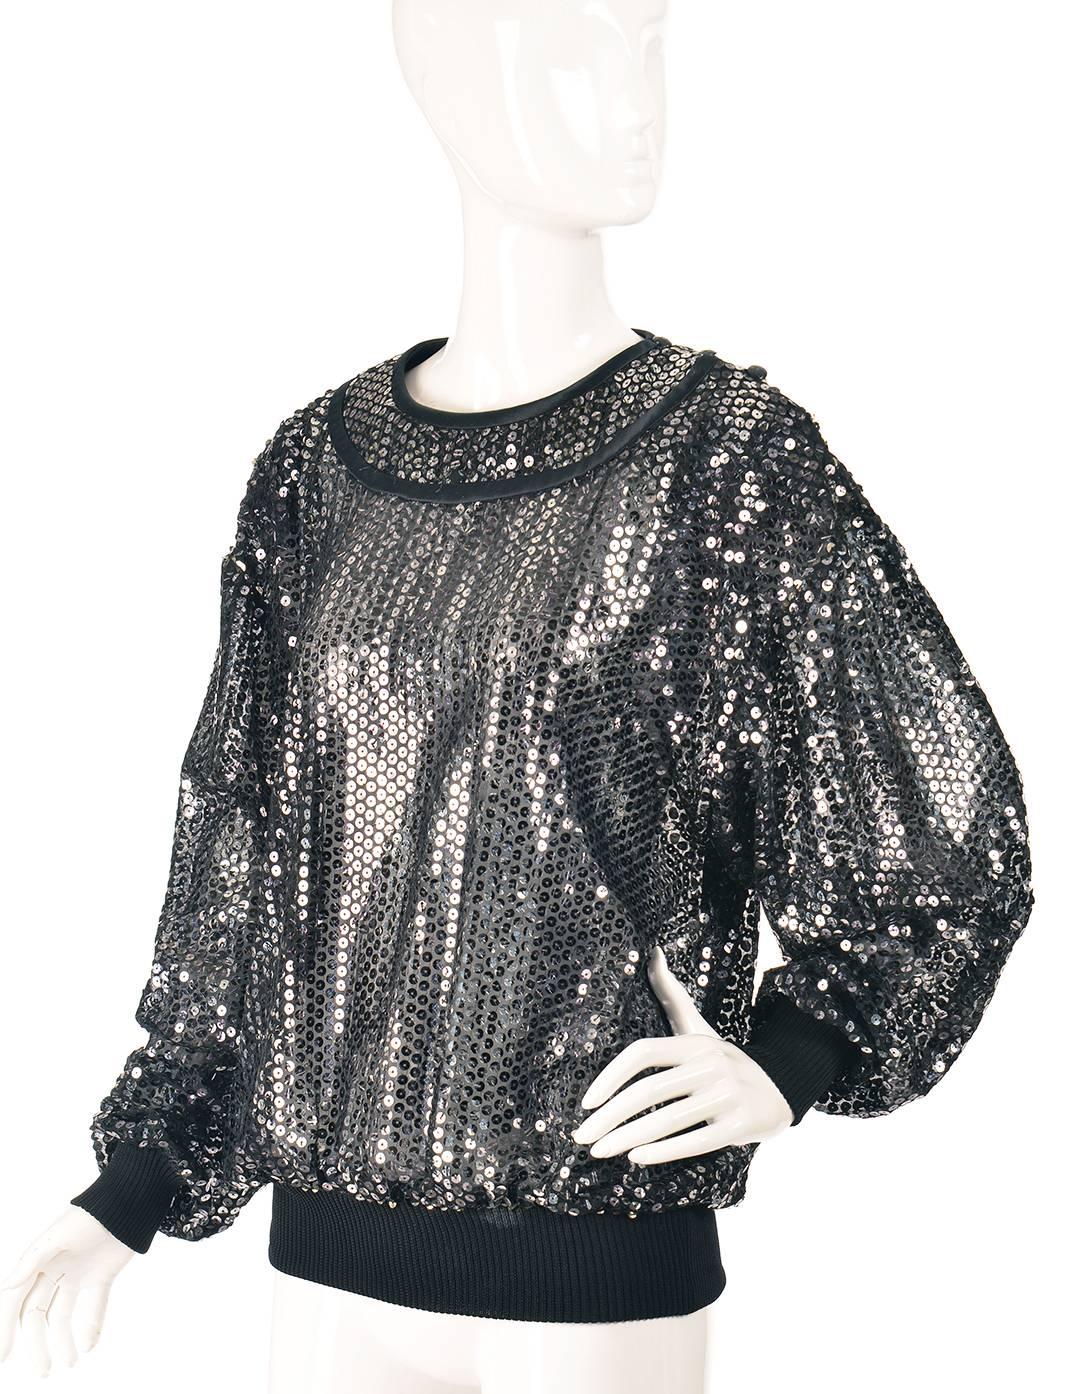 1980s Ungaro Variegated Sequin Top. 

This 1980s Ungaro sequin top is luxurious and relaxed! The blouse features vertical variegated black to silver to black sequins in a polished and elegant grunge style. The sequins are affixed to a black, sheer